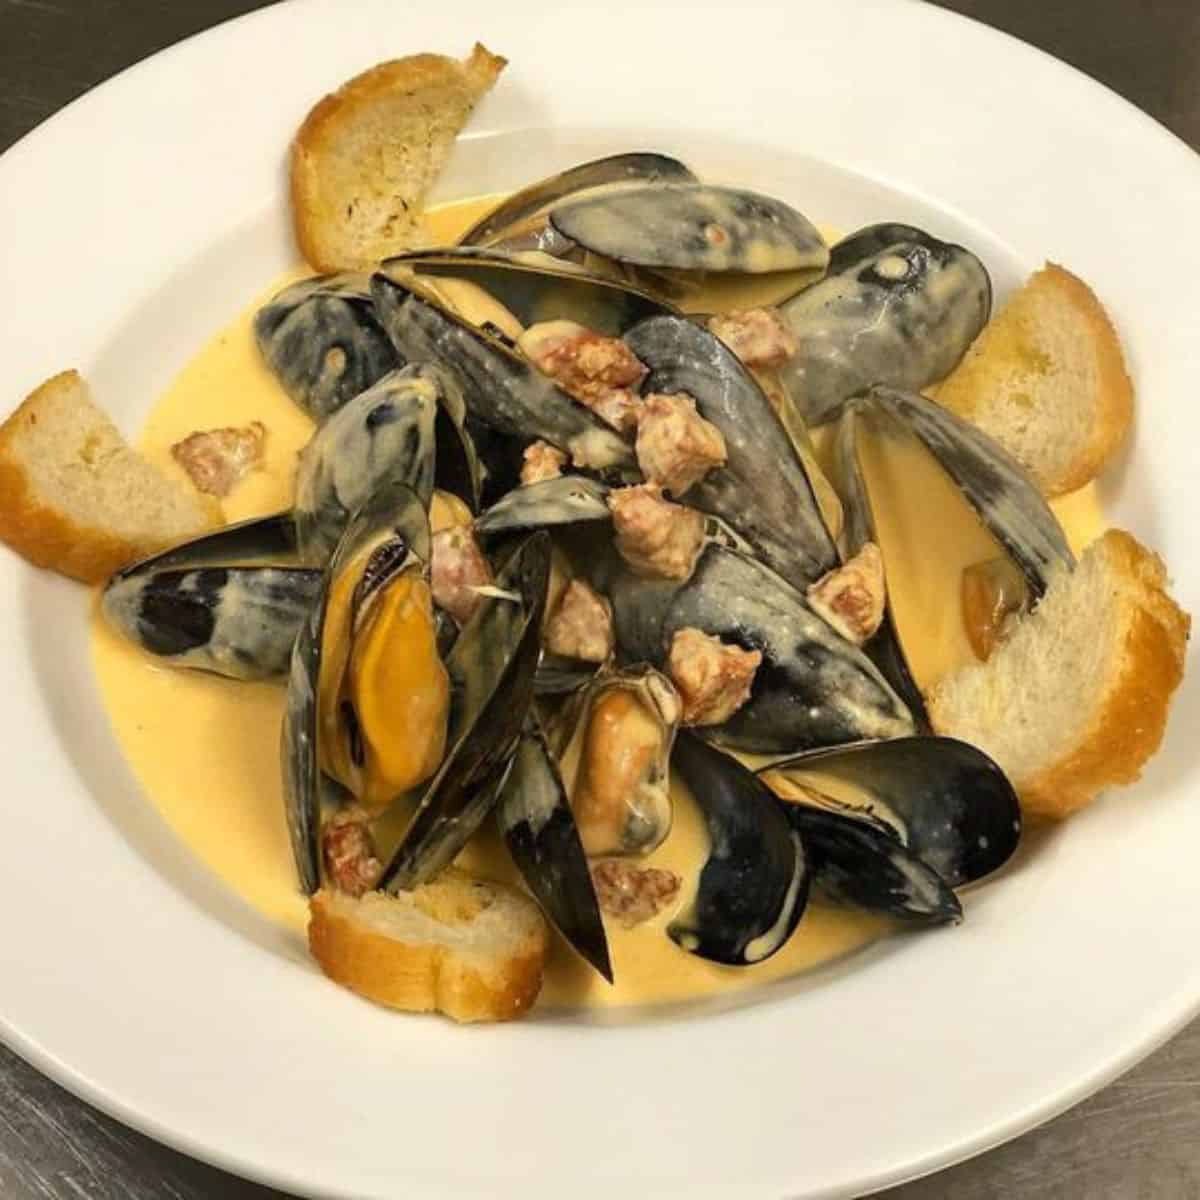 A delicious plate of Mussels with chorizo and bread Semolina